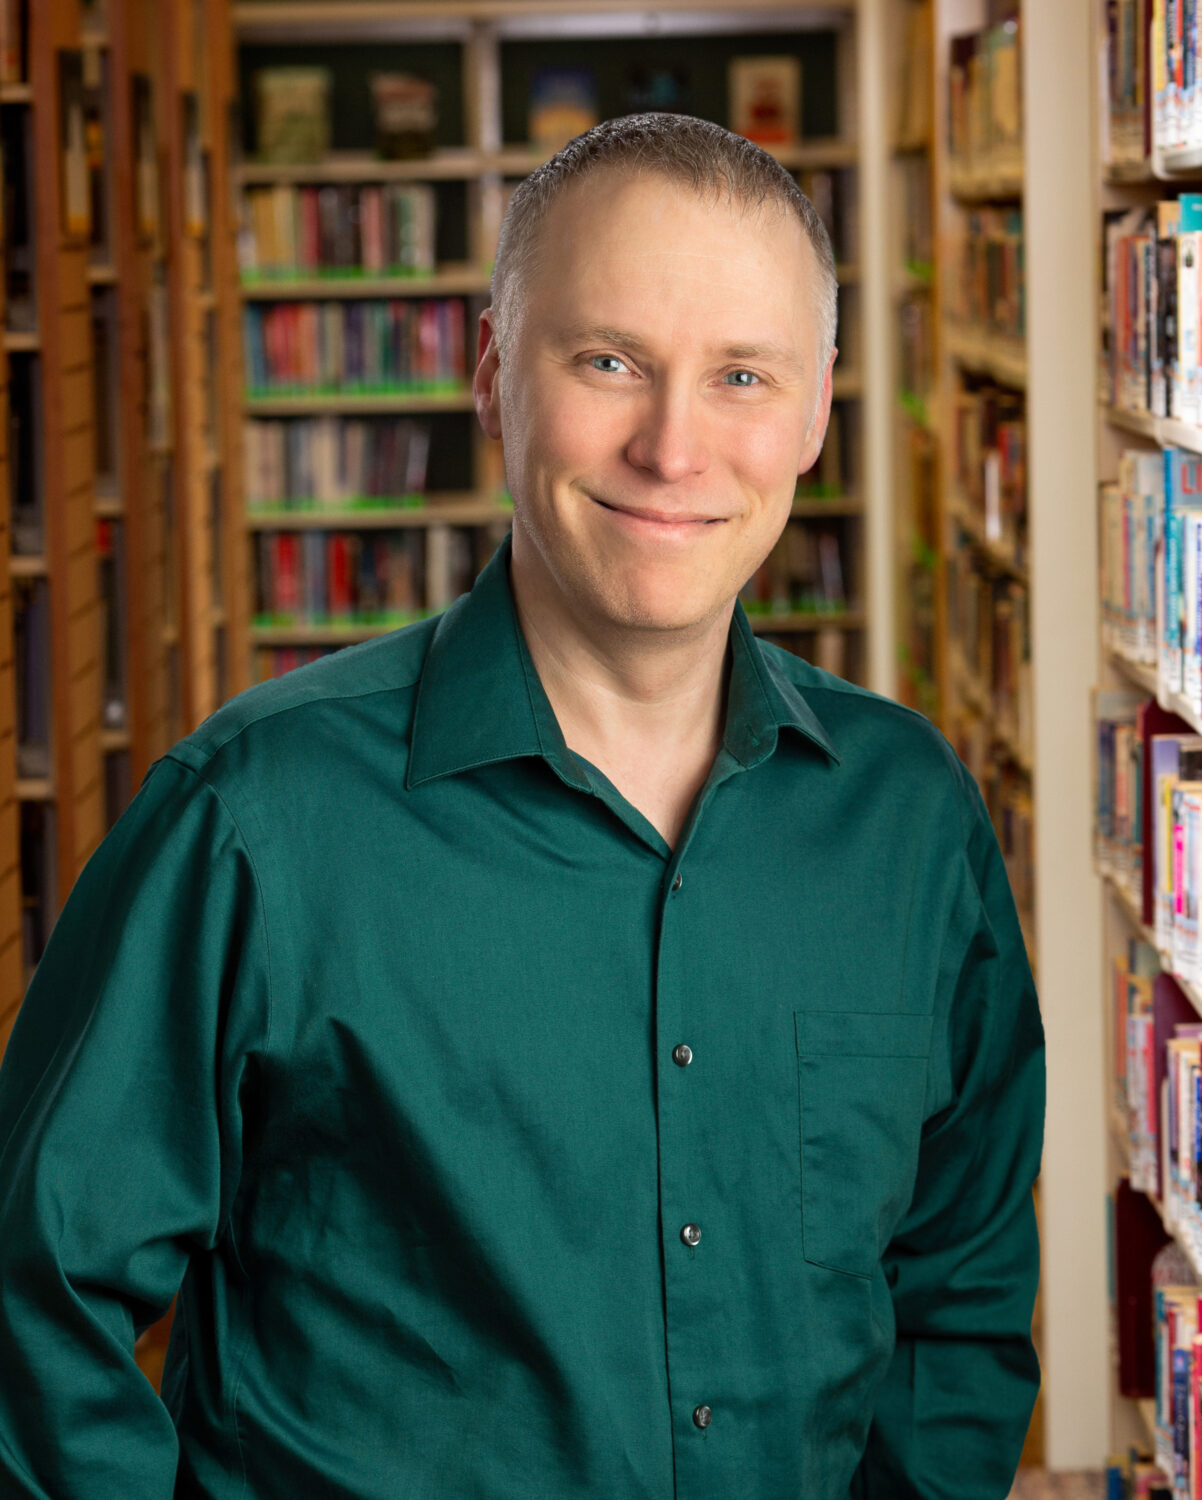 smiling man in a green shirt stands in front of library shelves